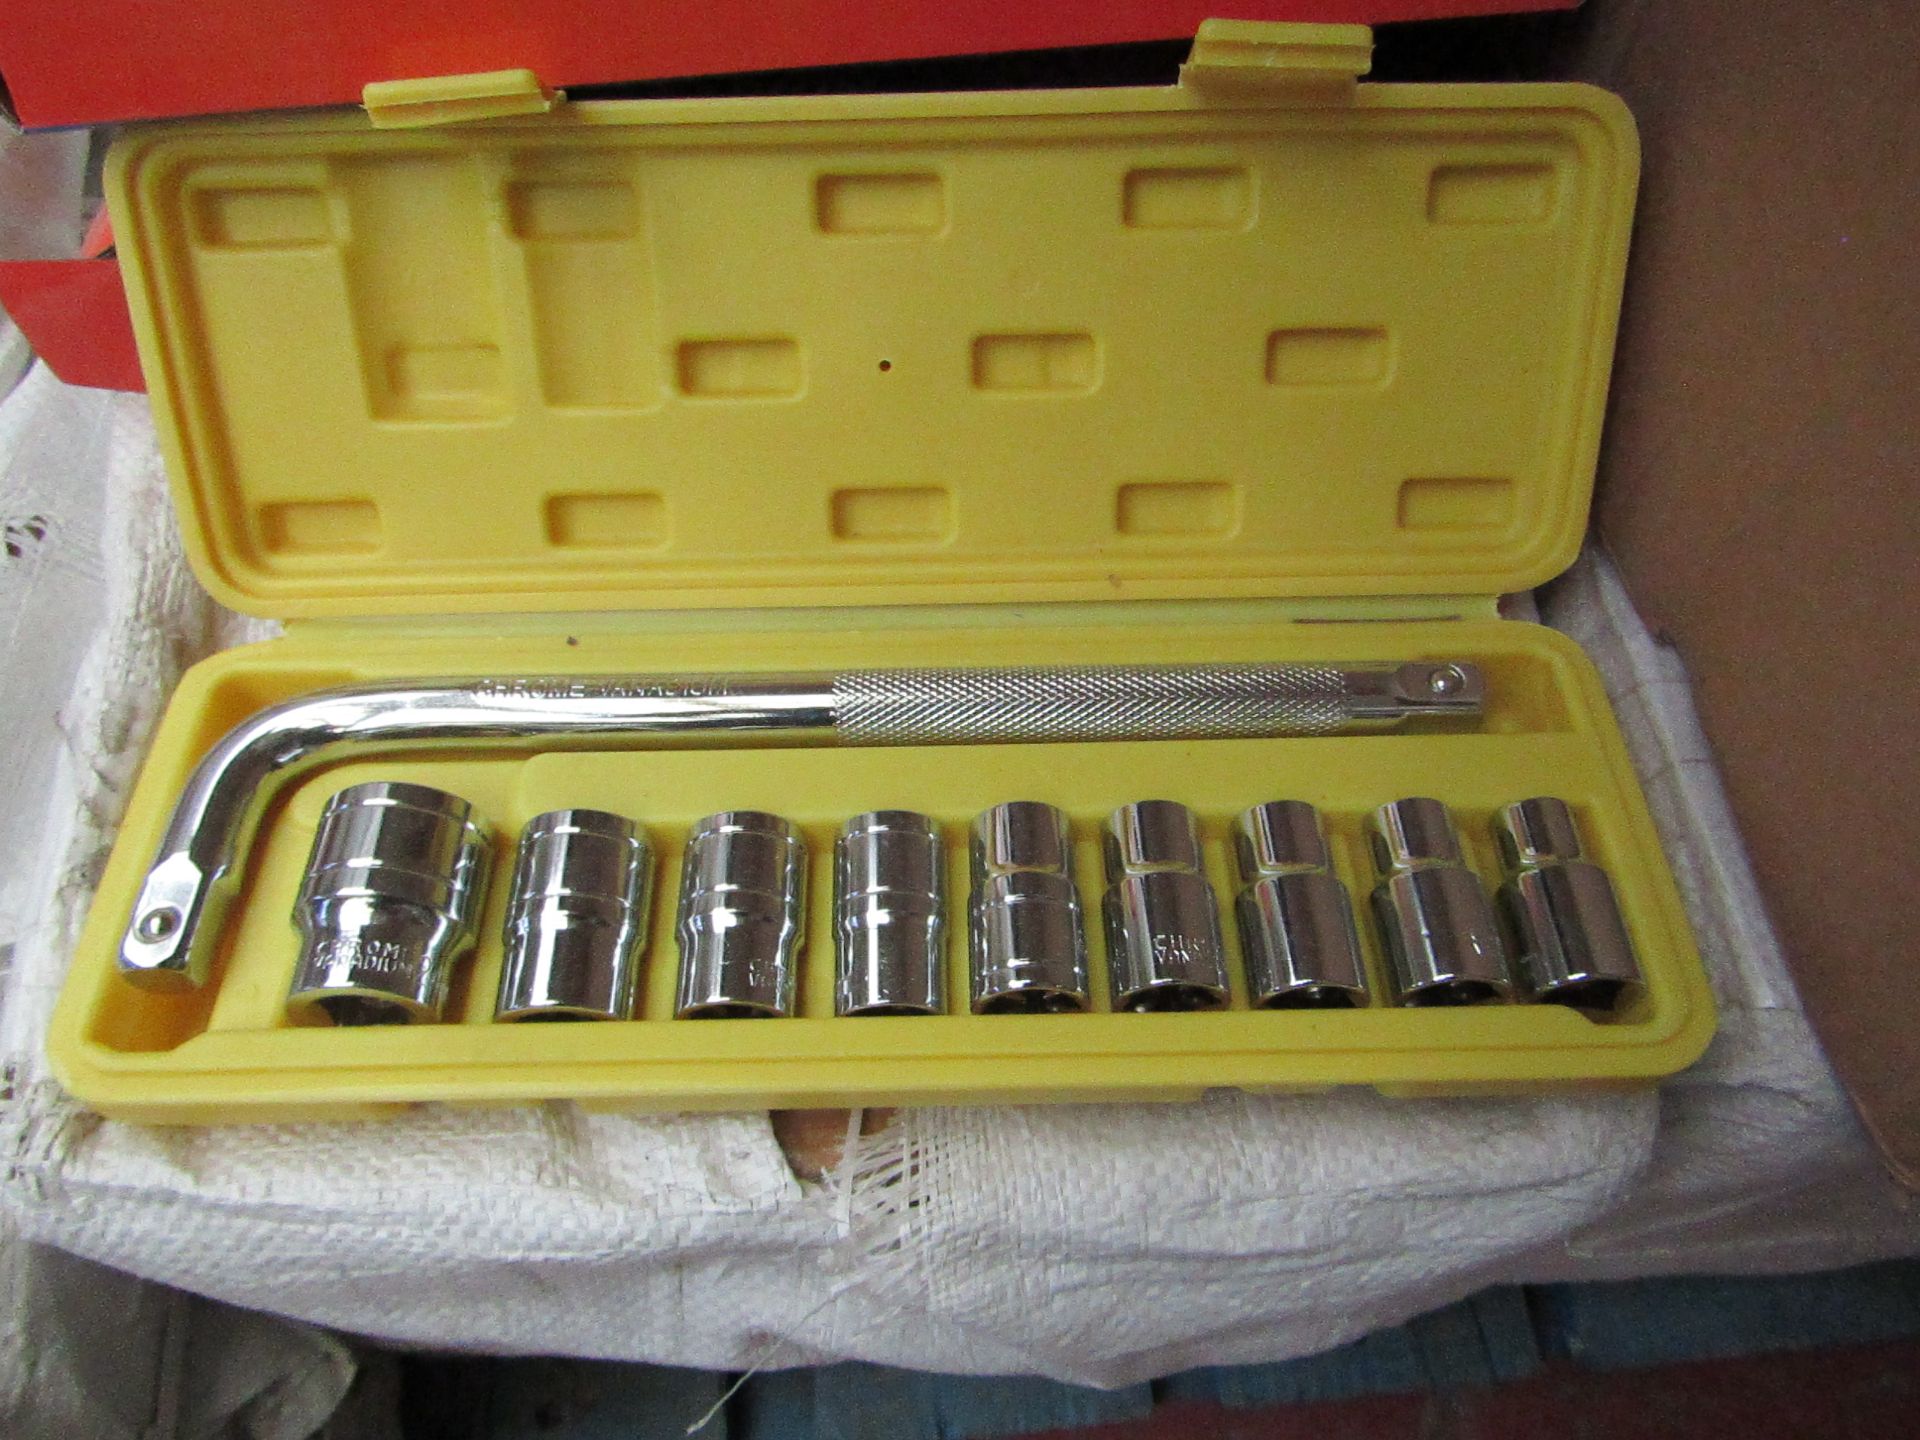 mlg 10 pcs chrome wrench and socket set,new in case